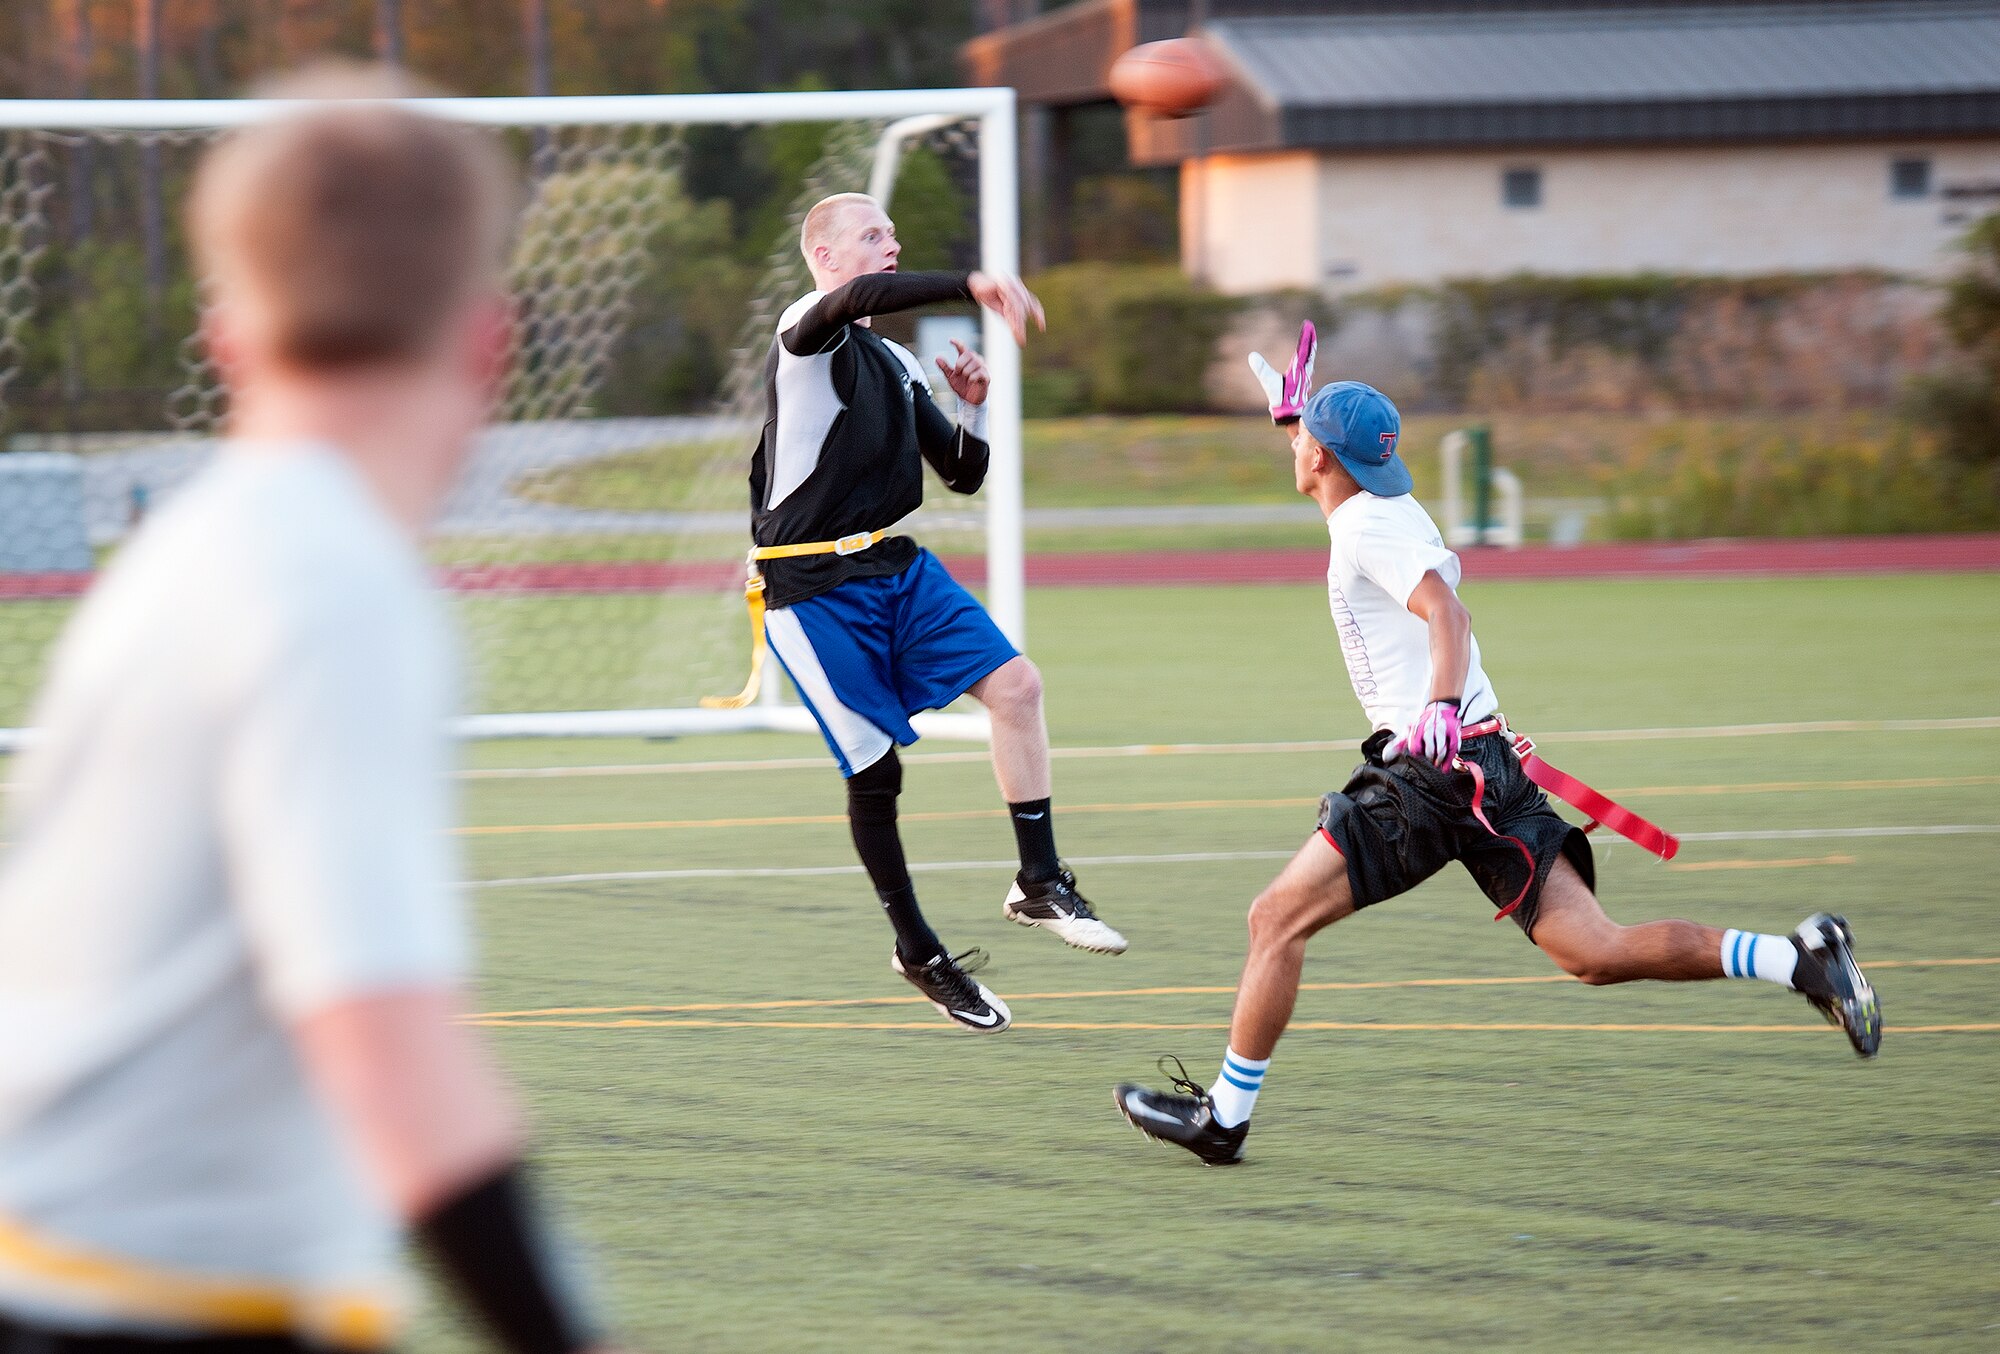 Ellis Parker, 1st Special Operations Maintenance Group quarterback, makes a pass attempt during an intramural flag football game on Hurlburt Field, Fla., Oct. 21, 2014. The 1st SOMXG defeated the 1st Special Operations Force Support Squadron, 30-24. (U.S. Air Force photo/Senior Airman Kentavist P. Brackin)